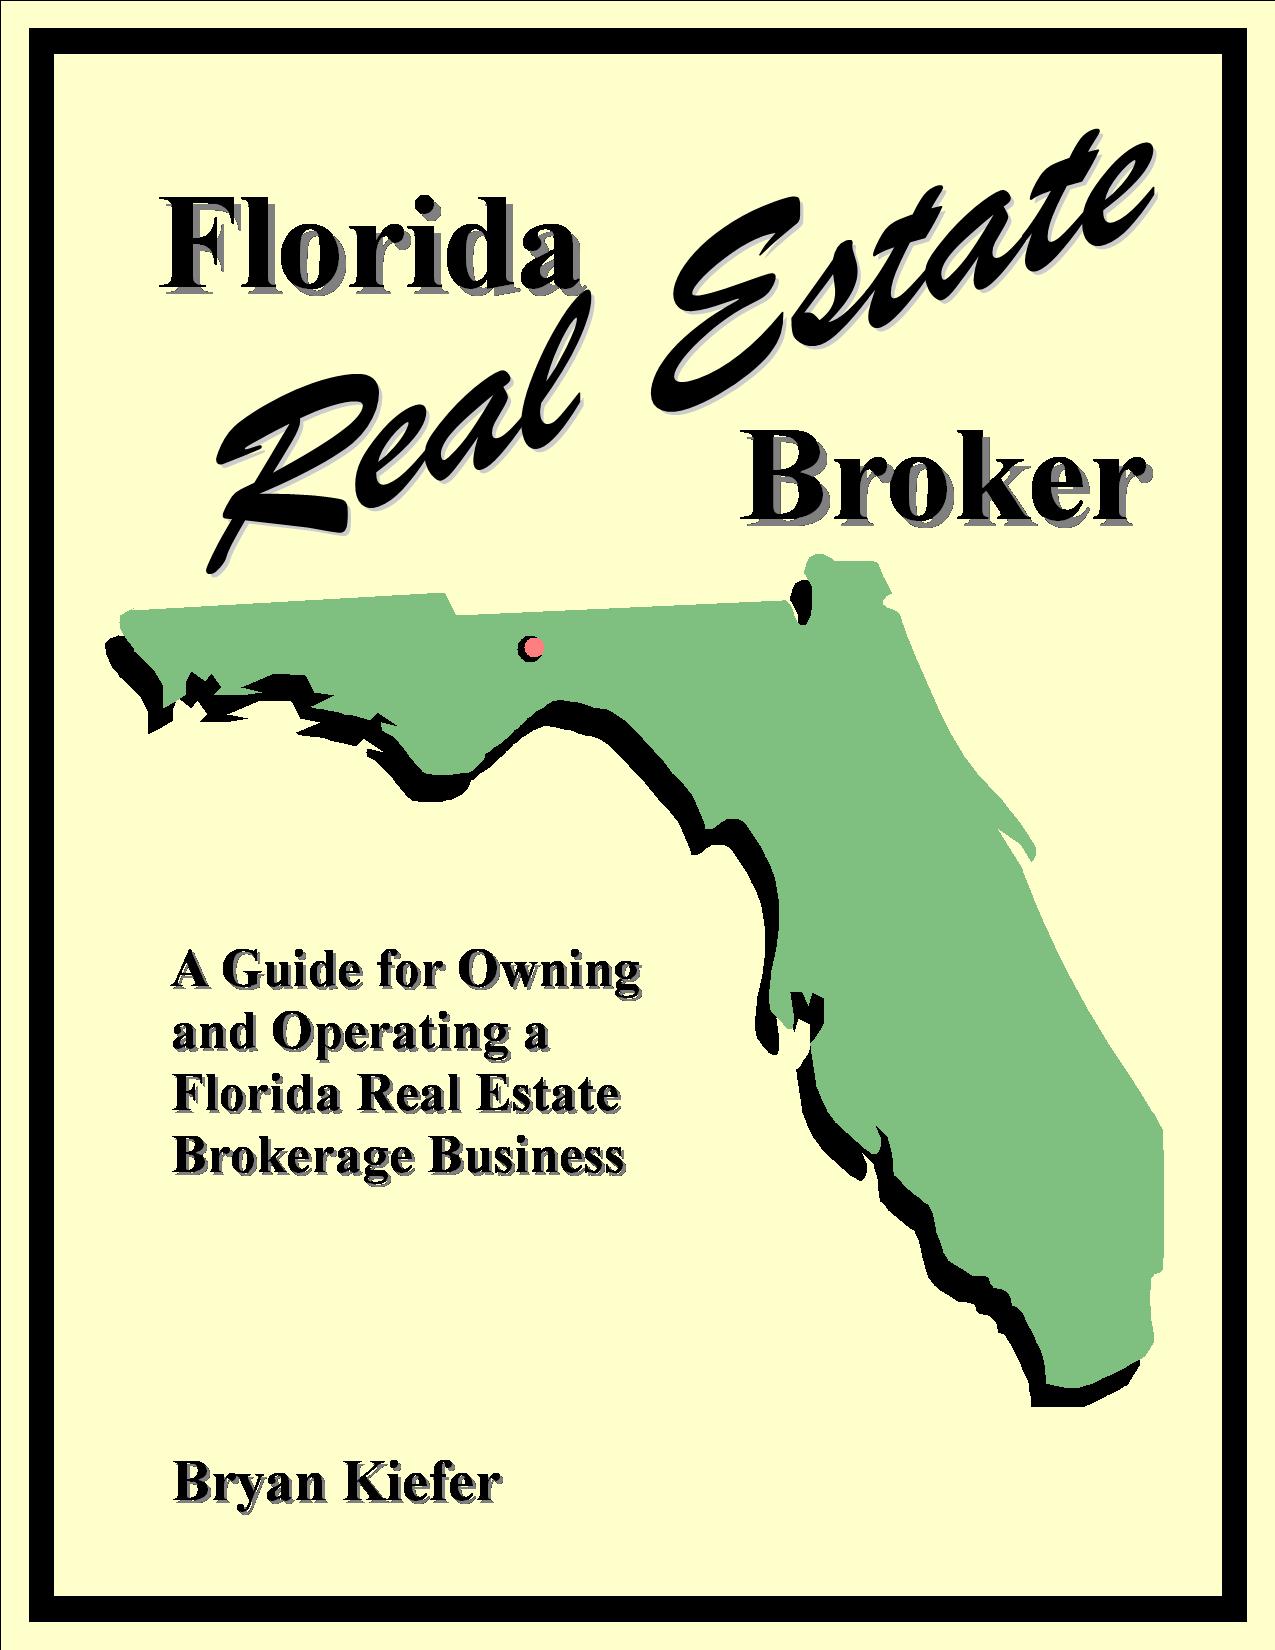 How long do florida real estate brokers have to keep records